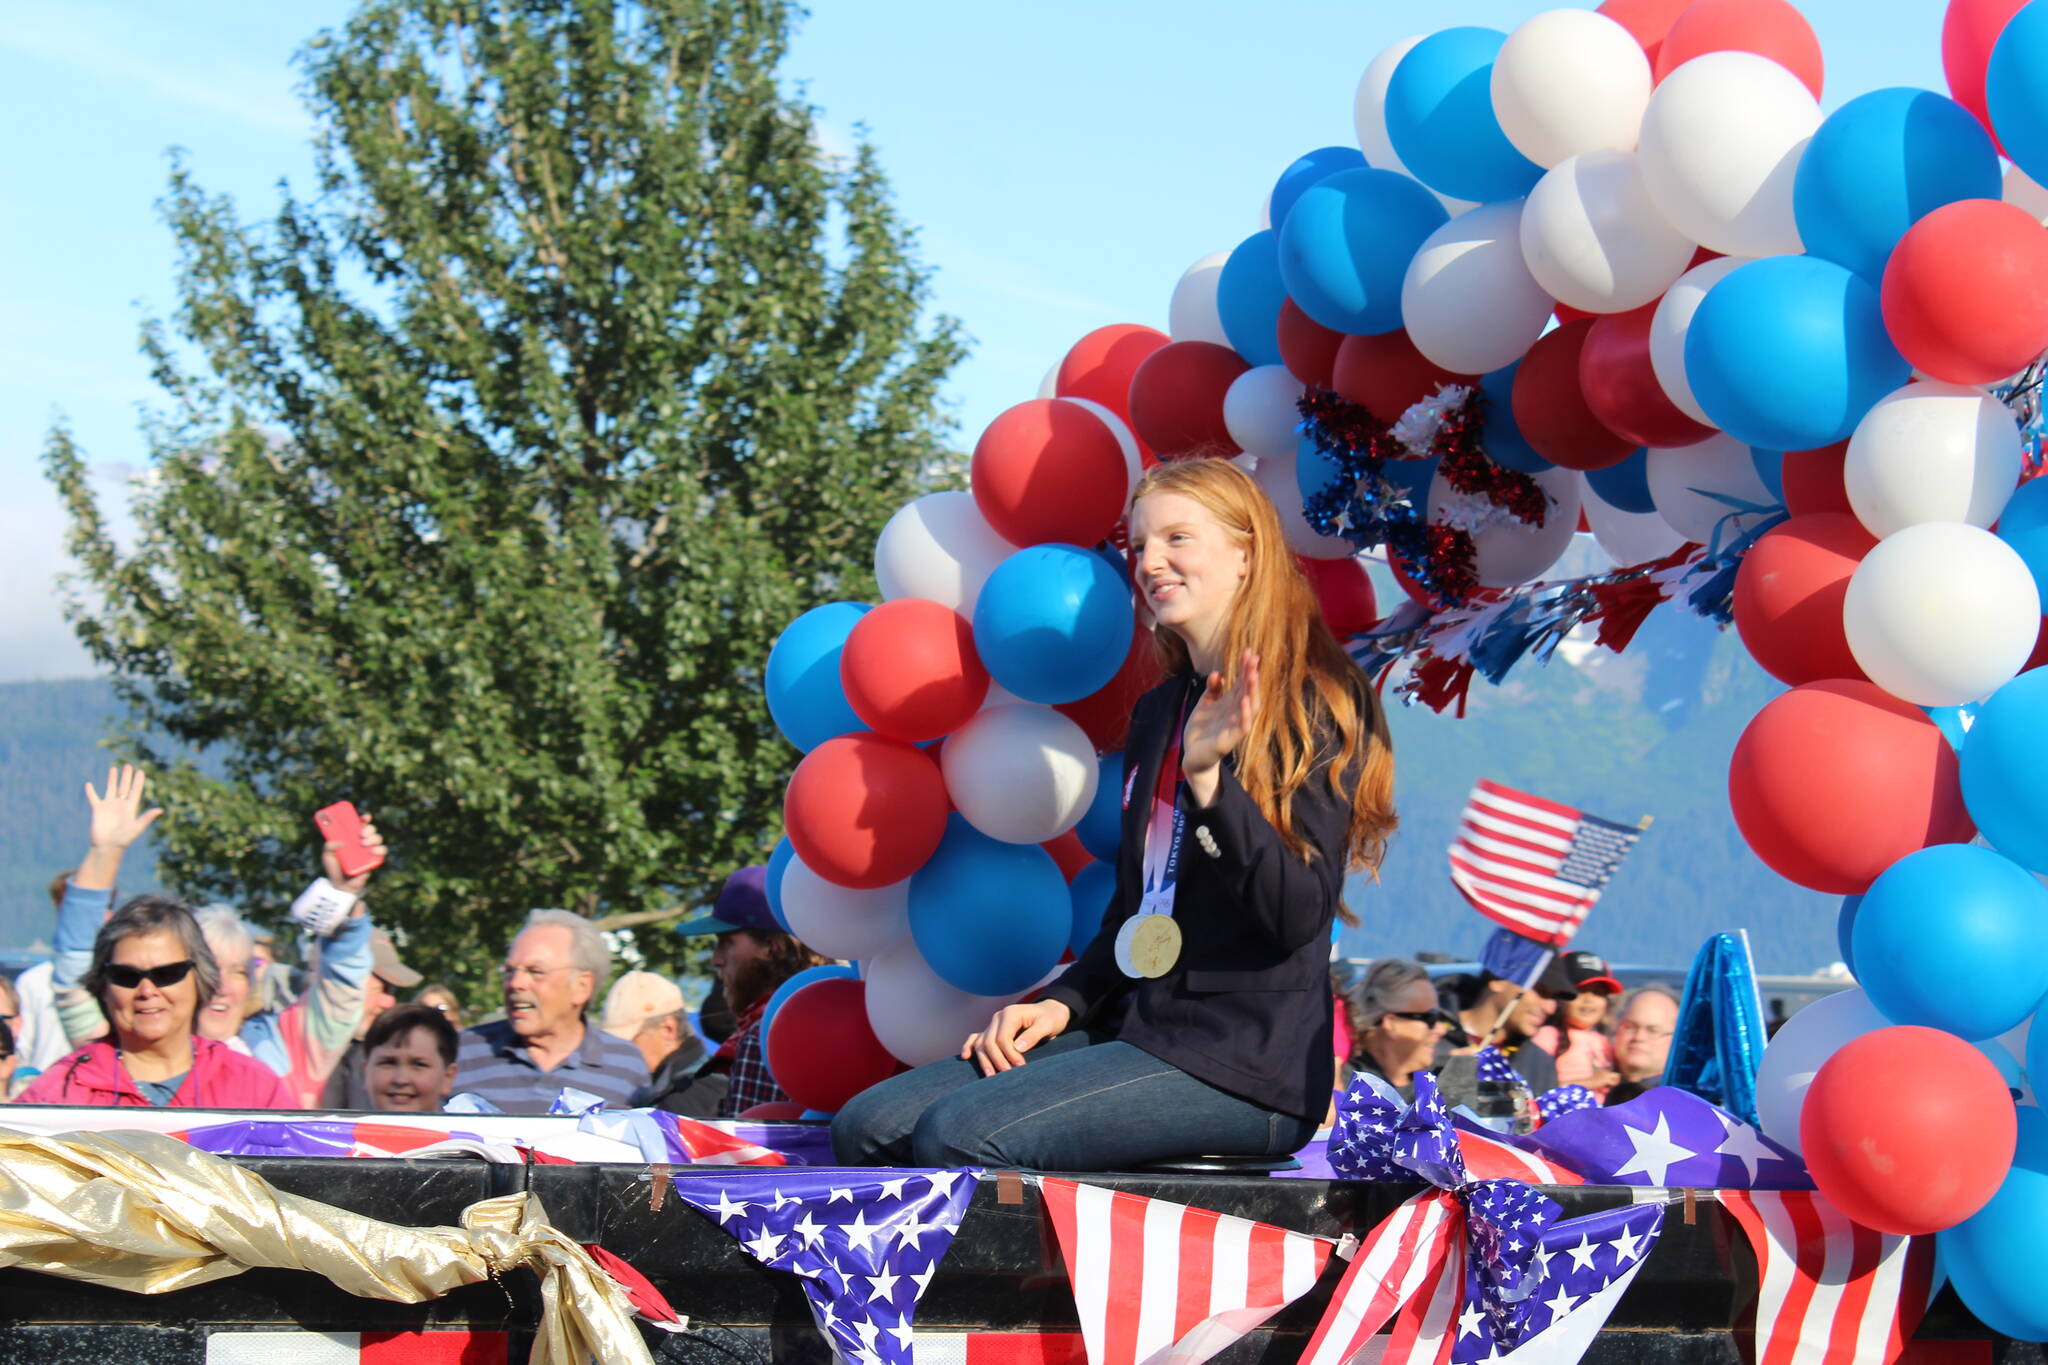 Olympic gold medalist Lydia Jacoby waves to the crowd in Seward during her celebratory parade on Thursday, Aug. 5, 2021. (Ashlyn O’Hara/Peninsula Clarion)